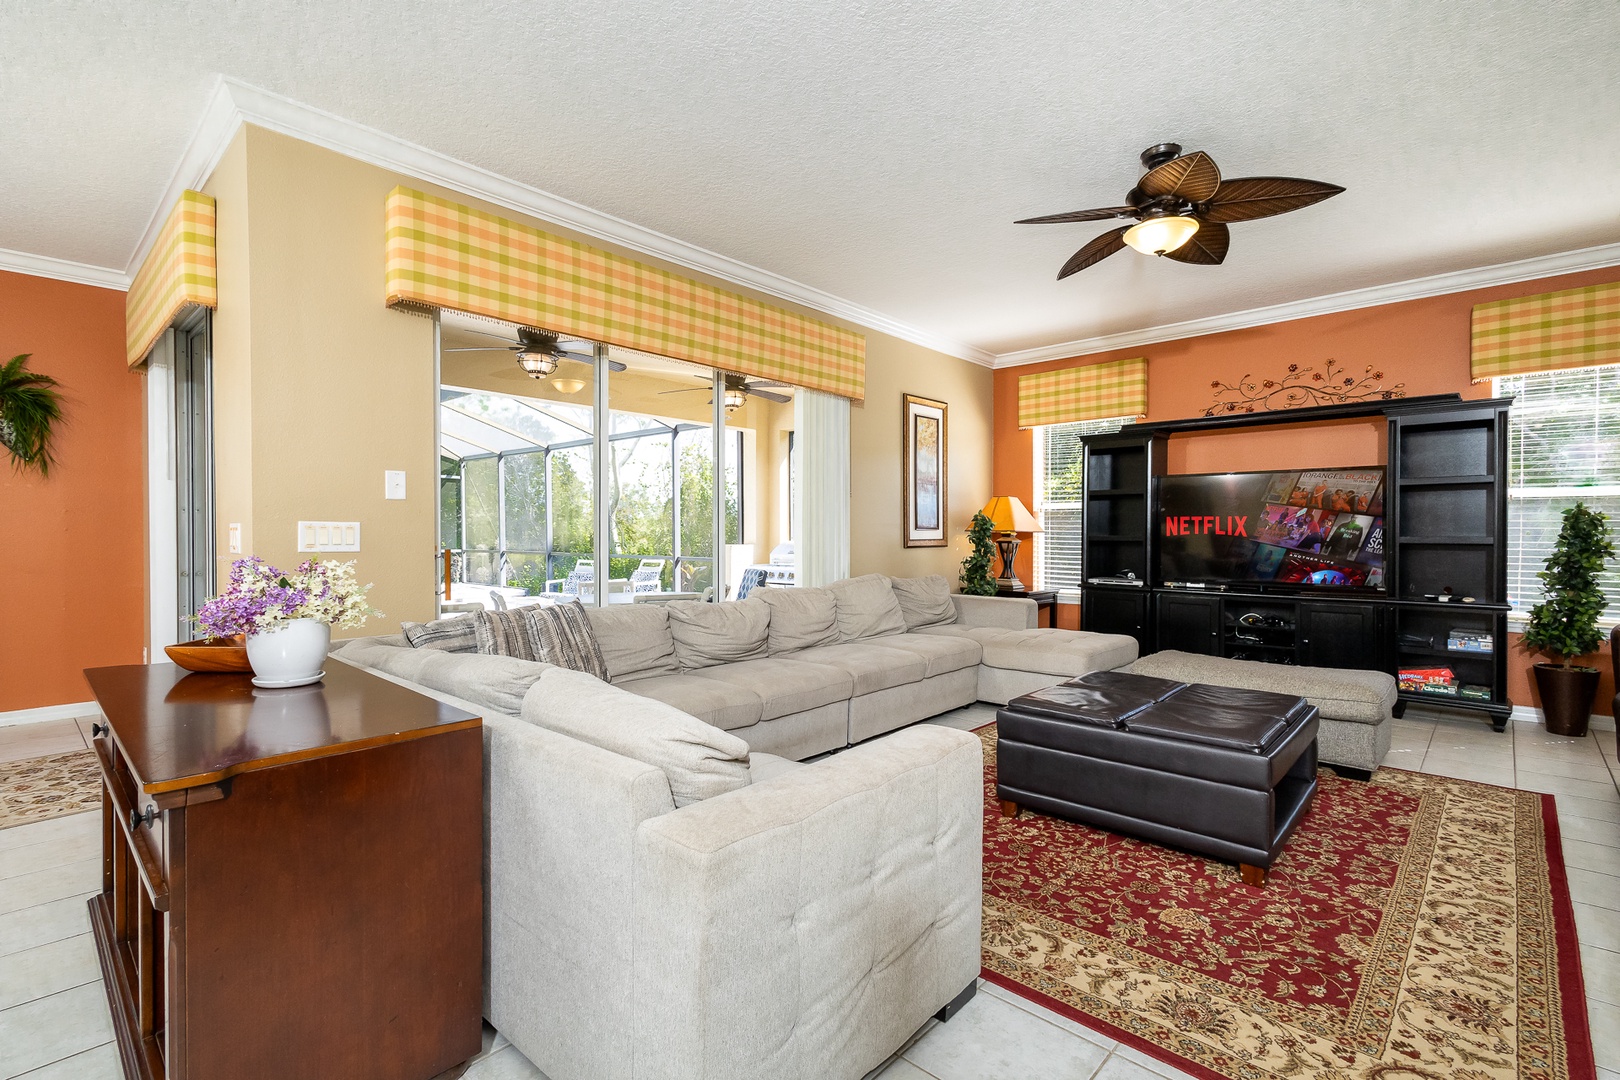 Kick back & enjoy a movie or a show in the family room at the rear of the home